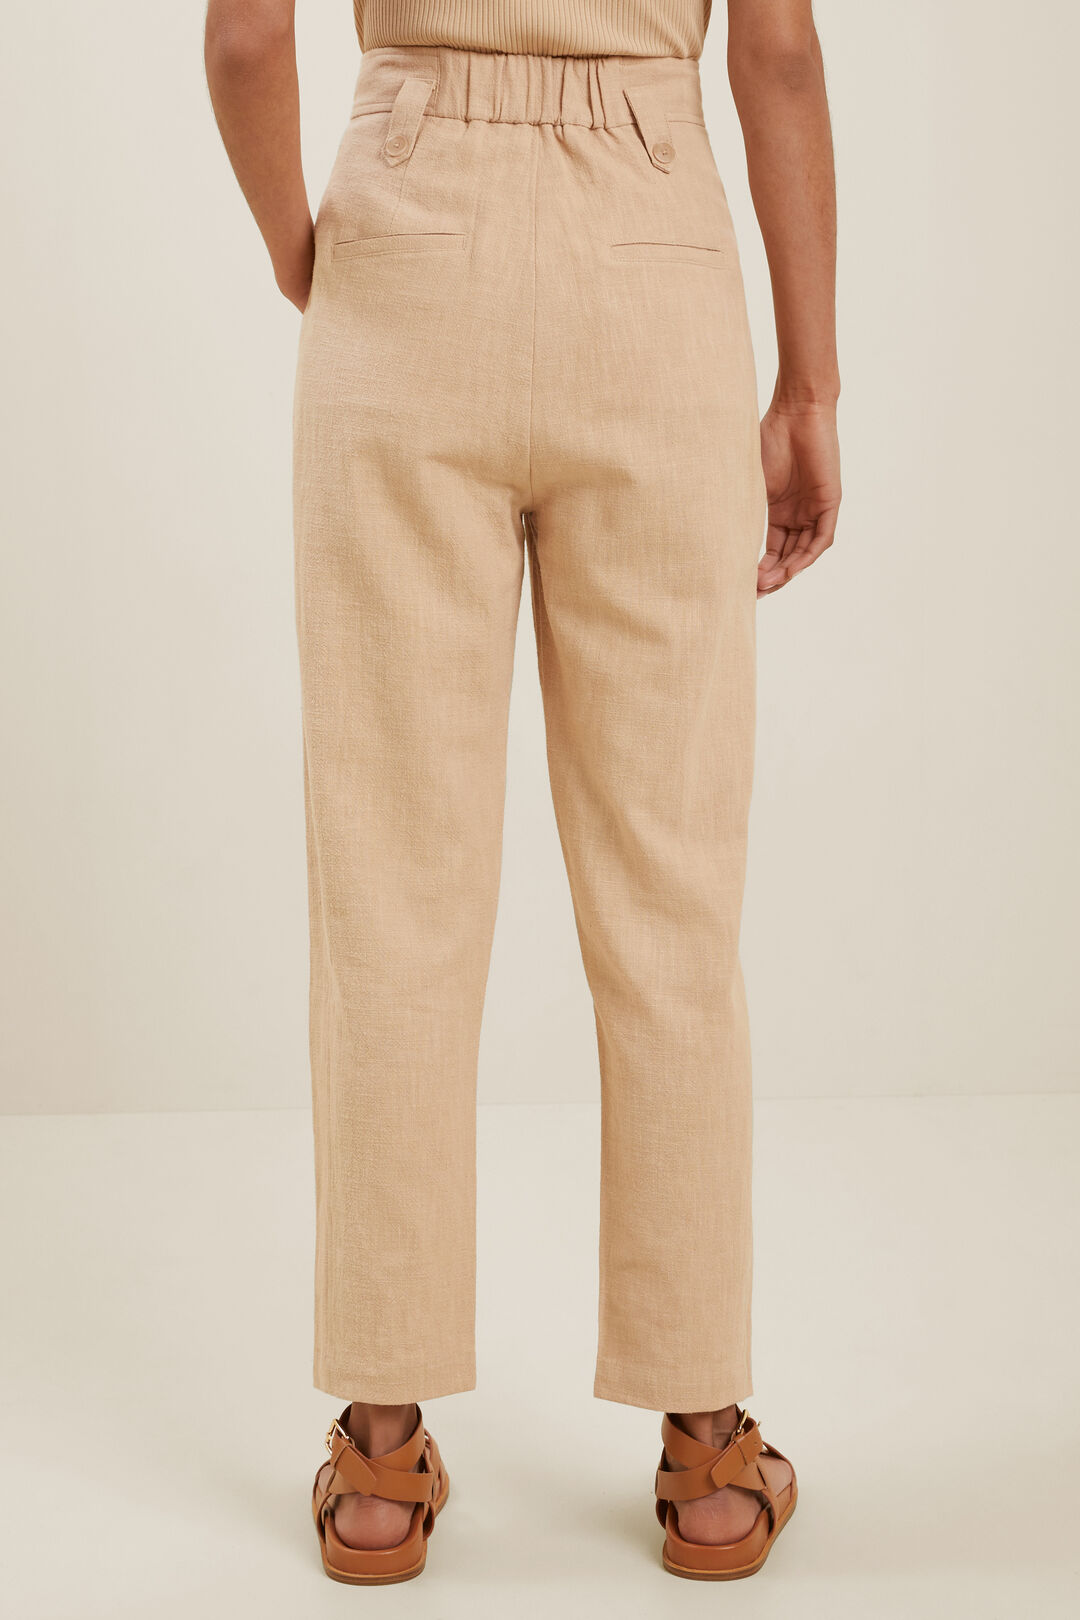 Textured Tapered Pant  Neutral Sand  hi-res